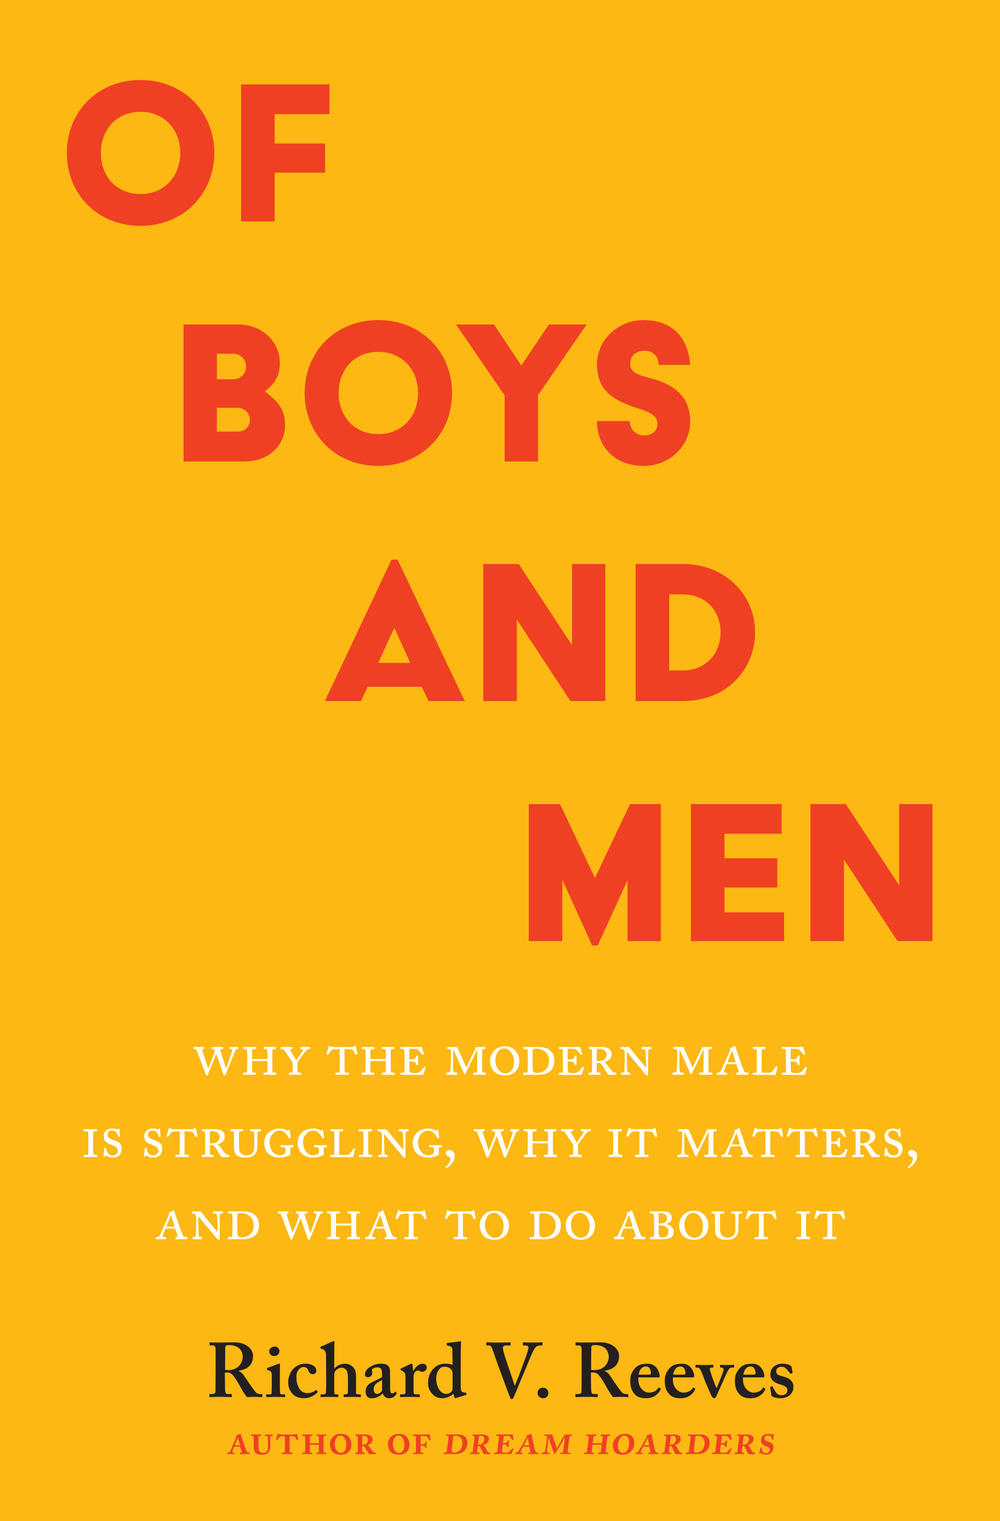 Richard V. Reeves' new book <em>Of Boys and Men</em> explores why men are struggling and what can be done about it.